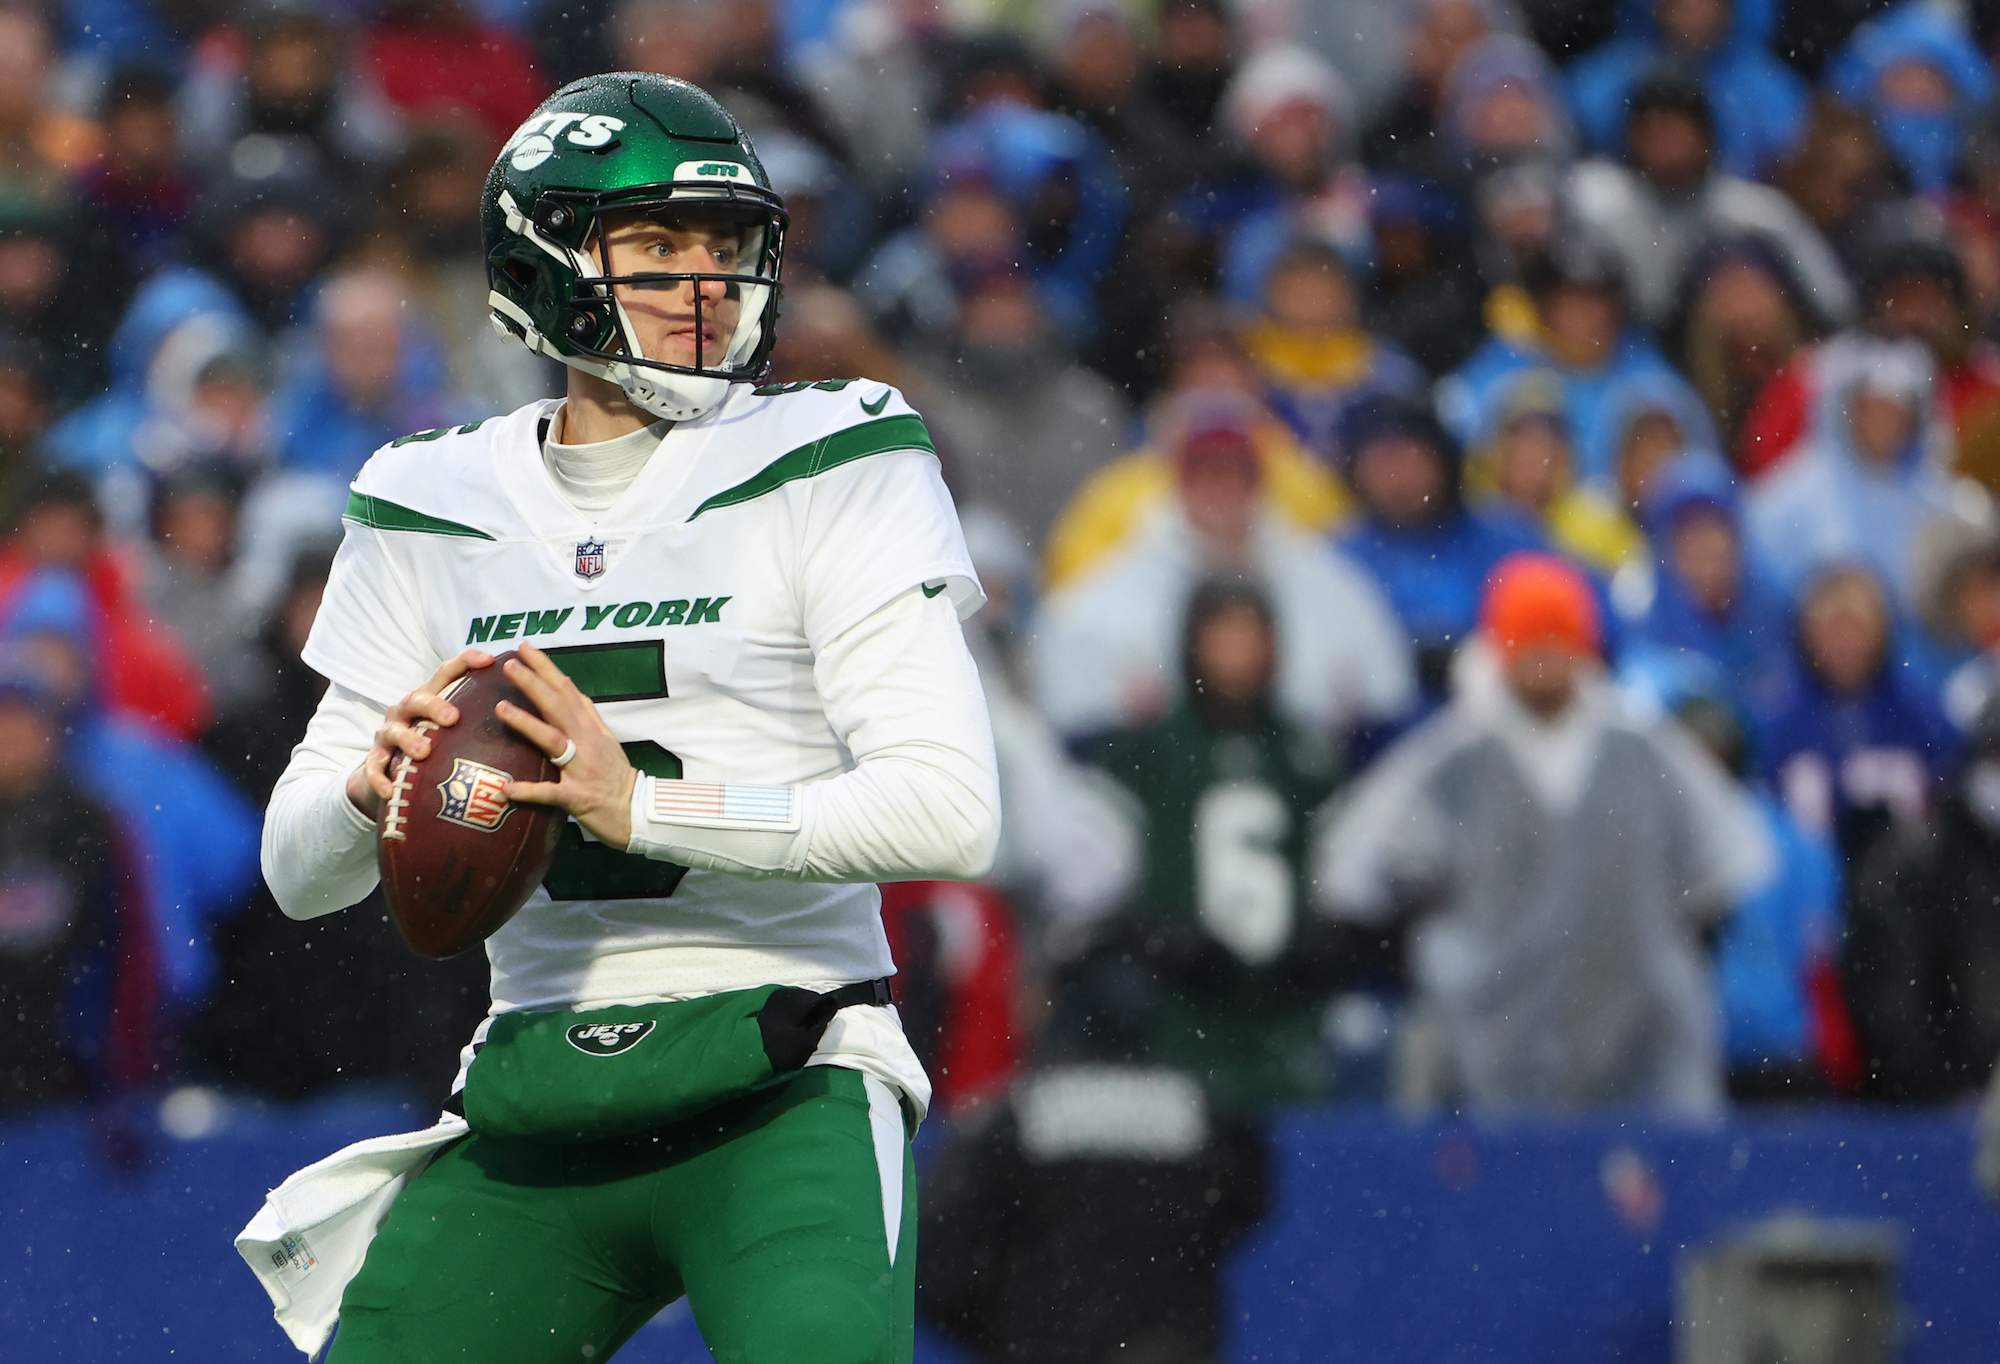 ORCHARD PARK, NY - DECEMBER 11: Mike White #5 of the New York Jets looks to throw a pass against the Buffalo Bills at Highmark Stadium on December 11, 2022 in Orchard Park, New York. (Photo by Timothy T Ludwig/Getty Images)